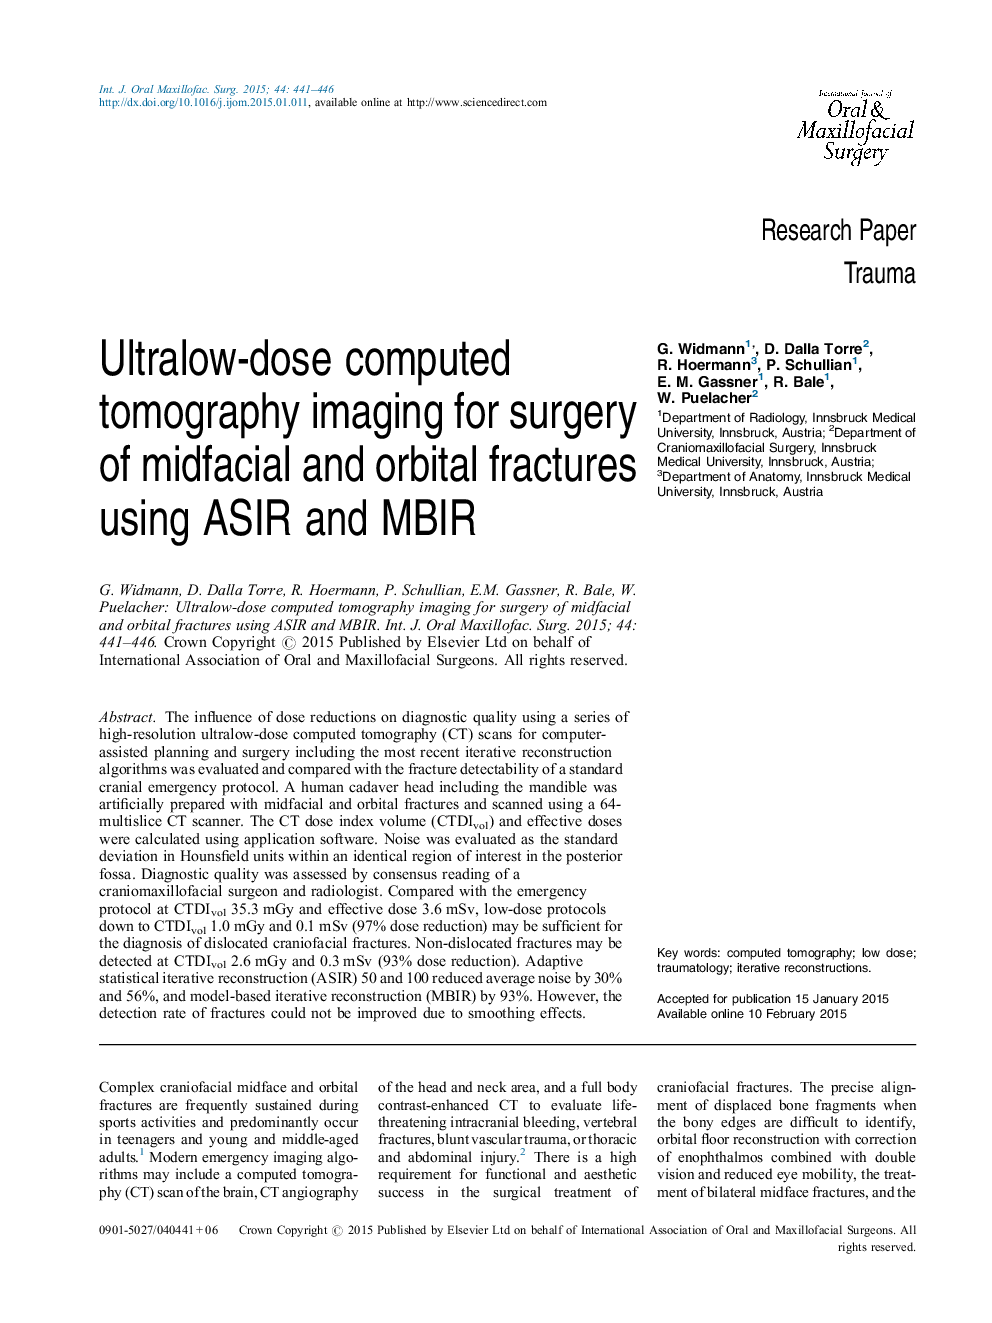 Research PaperTraumaUltralow-dose computed tomography imaging for surgery of midfacial and orbital fractures using ASIR and MBIR